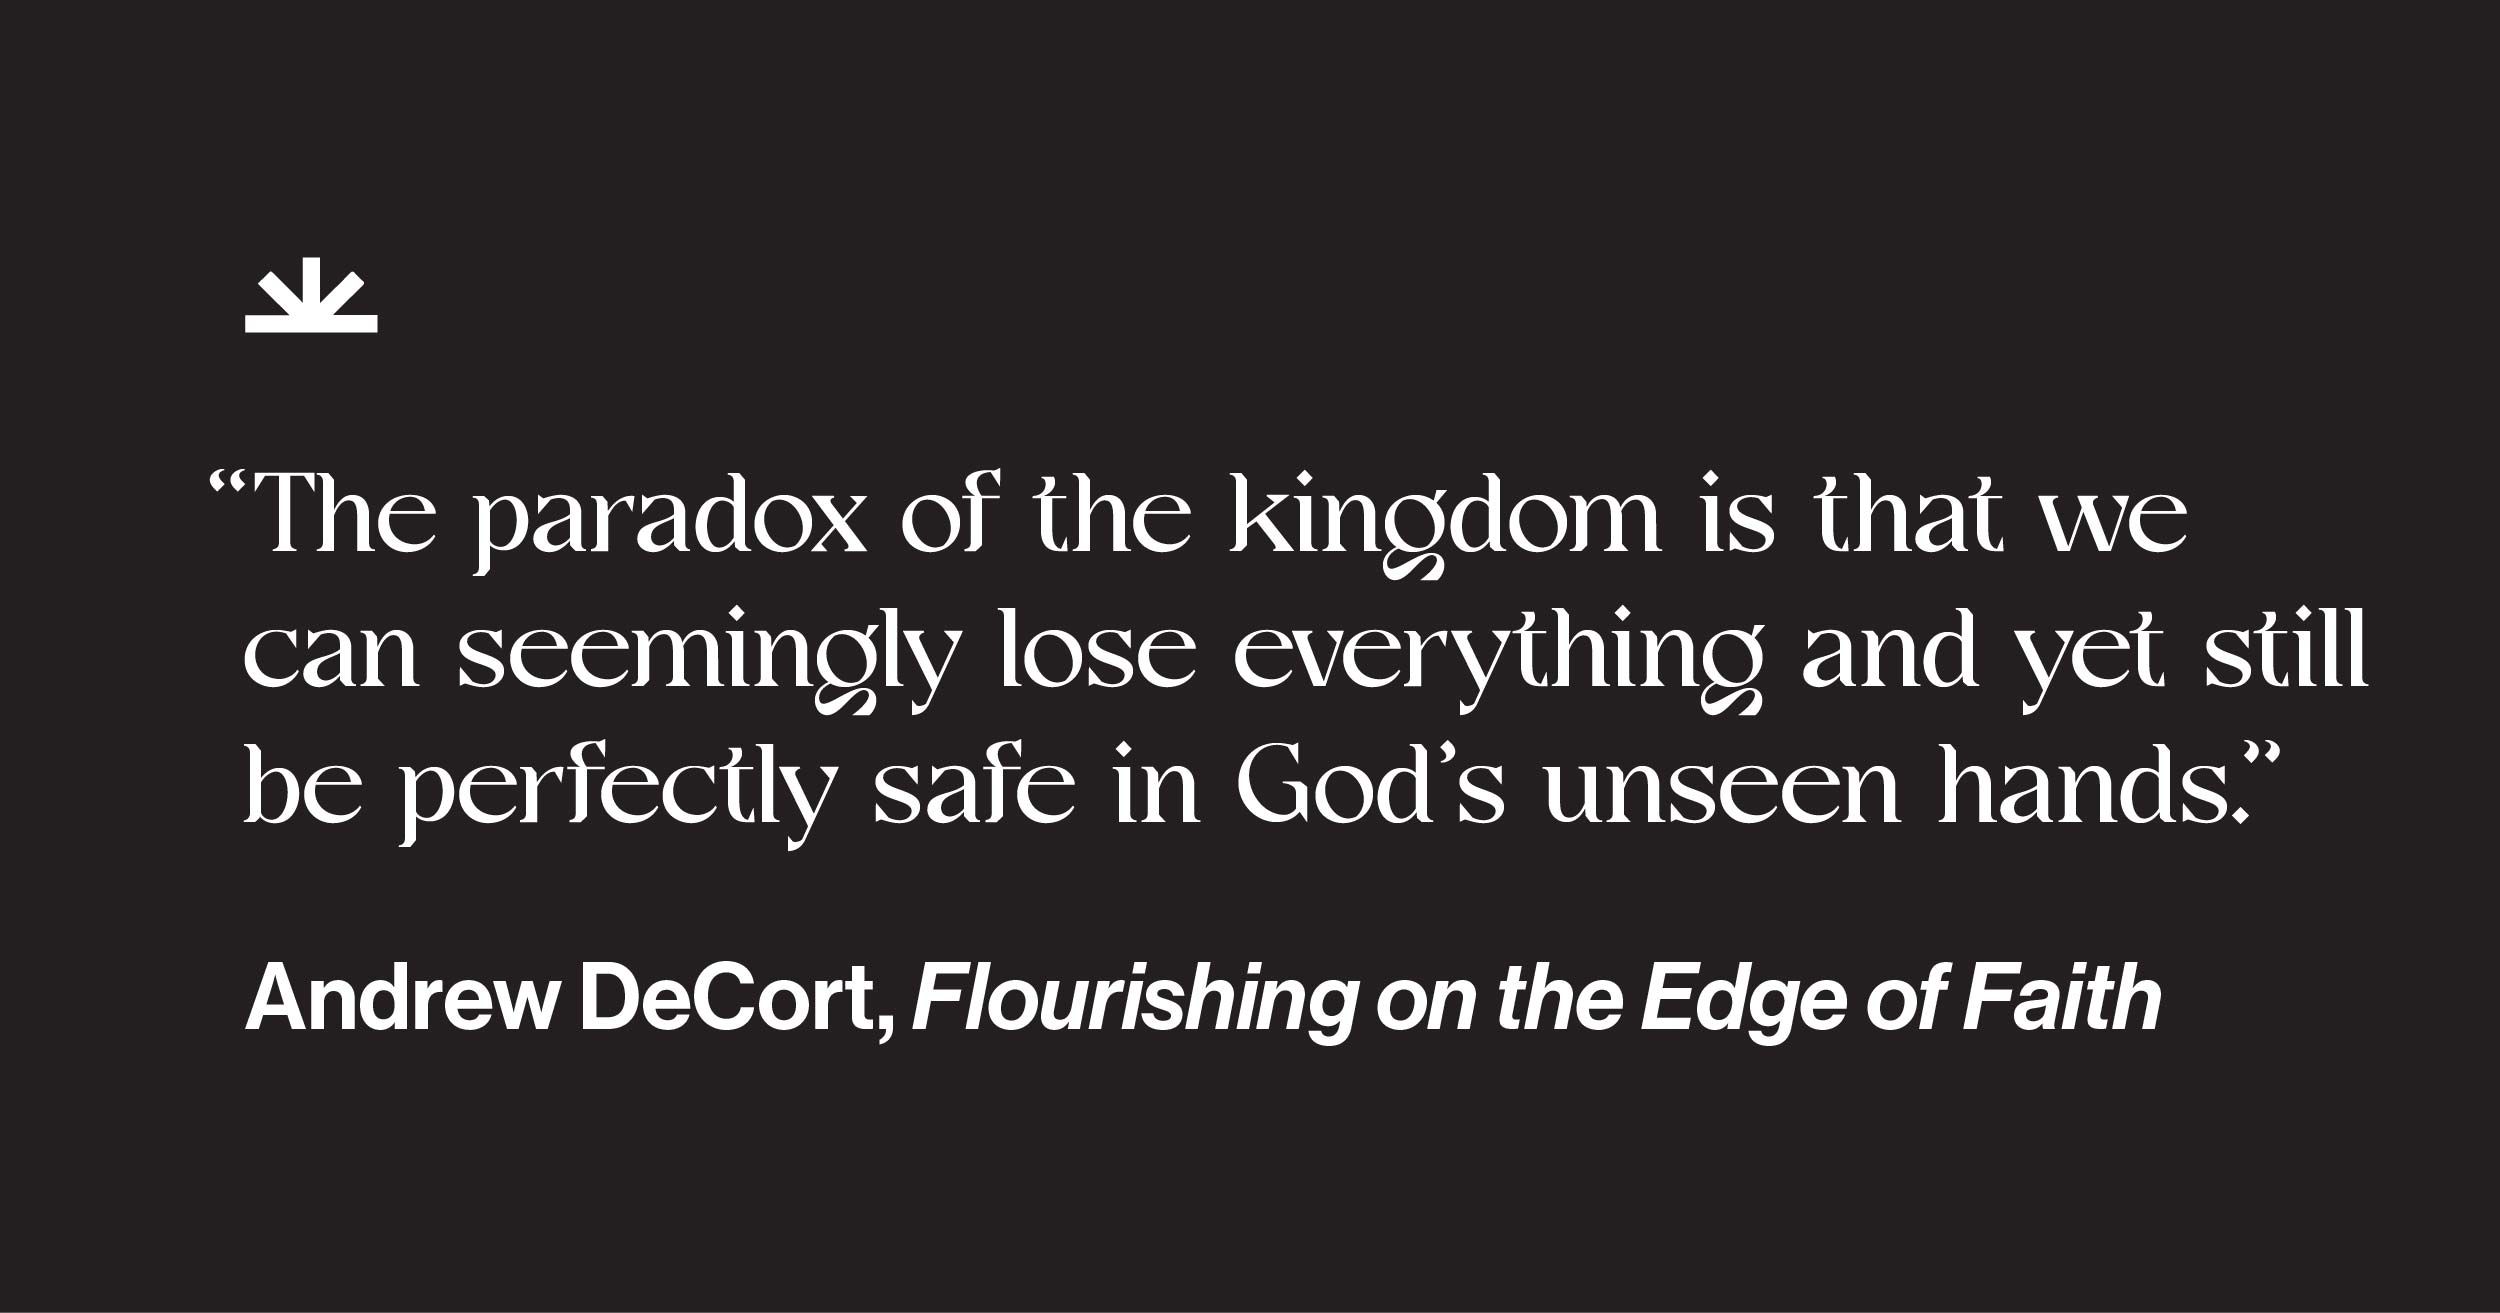 Quote from Flourishing on the Edge of Faith describing Jesus's prayer and the paradox of the kingdom: we can seemingly lose everything and yet be perfectly safe with God. 